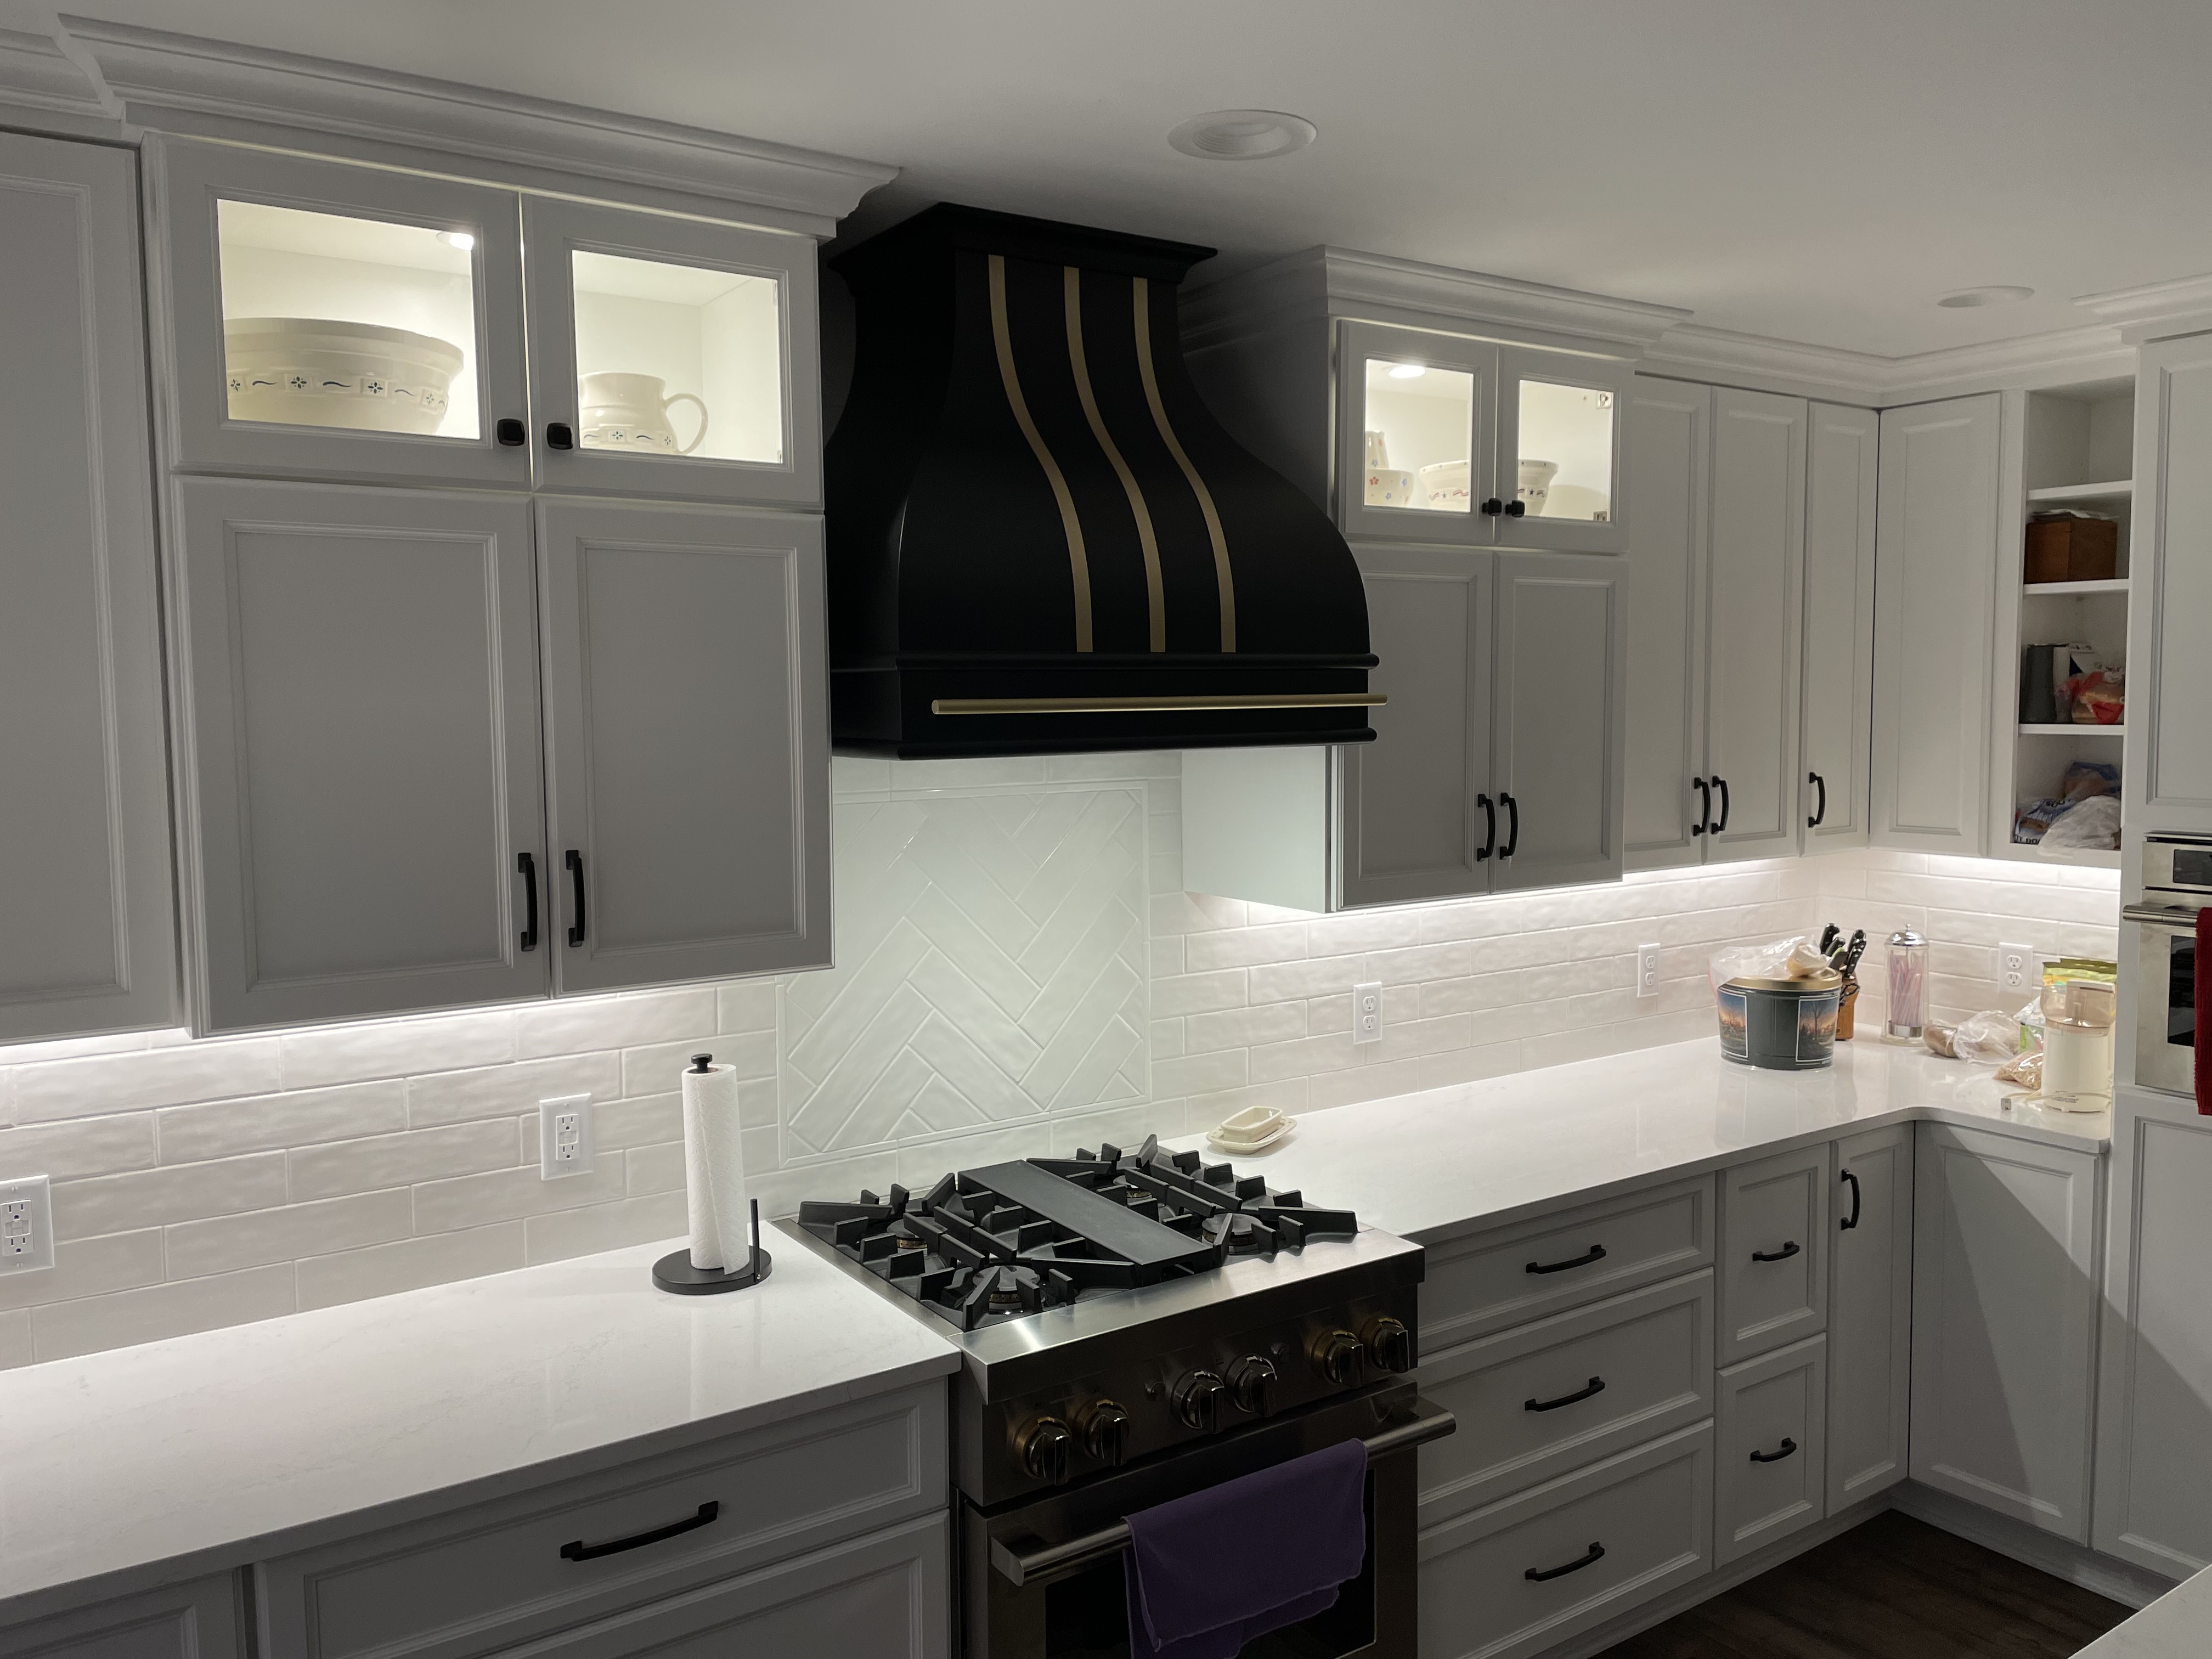 A classic kitchen design with white kitchen cabinets and countertops, featuring a stylish range hood charming brick backsplash